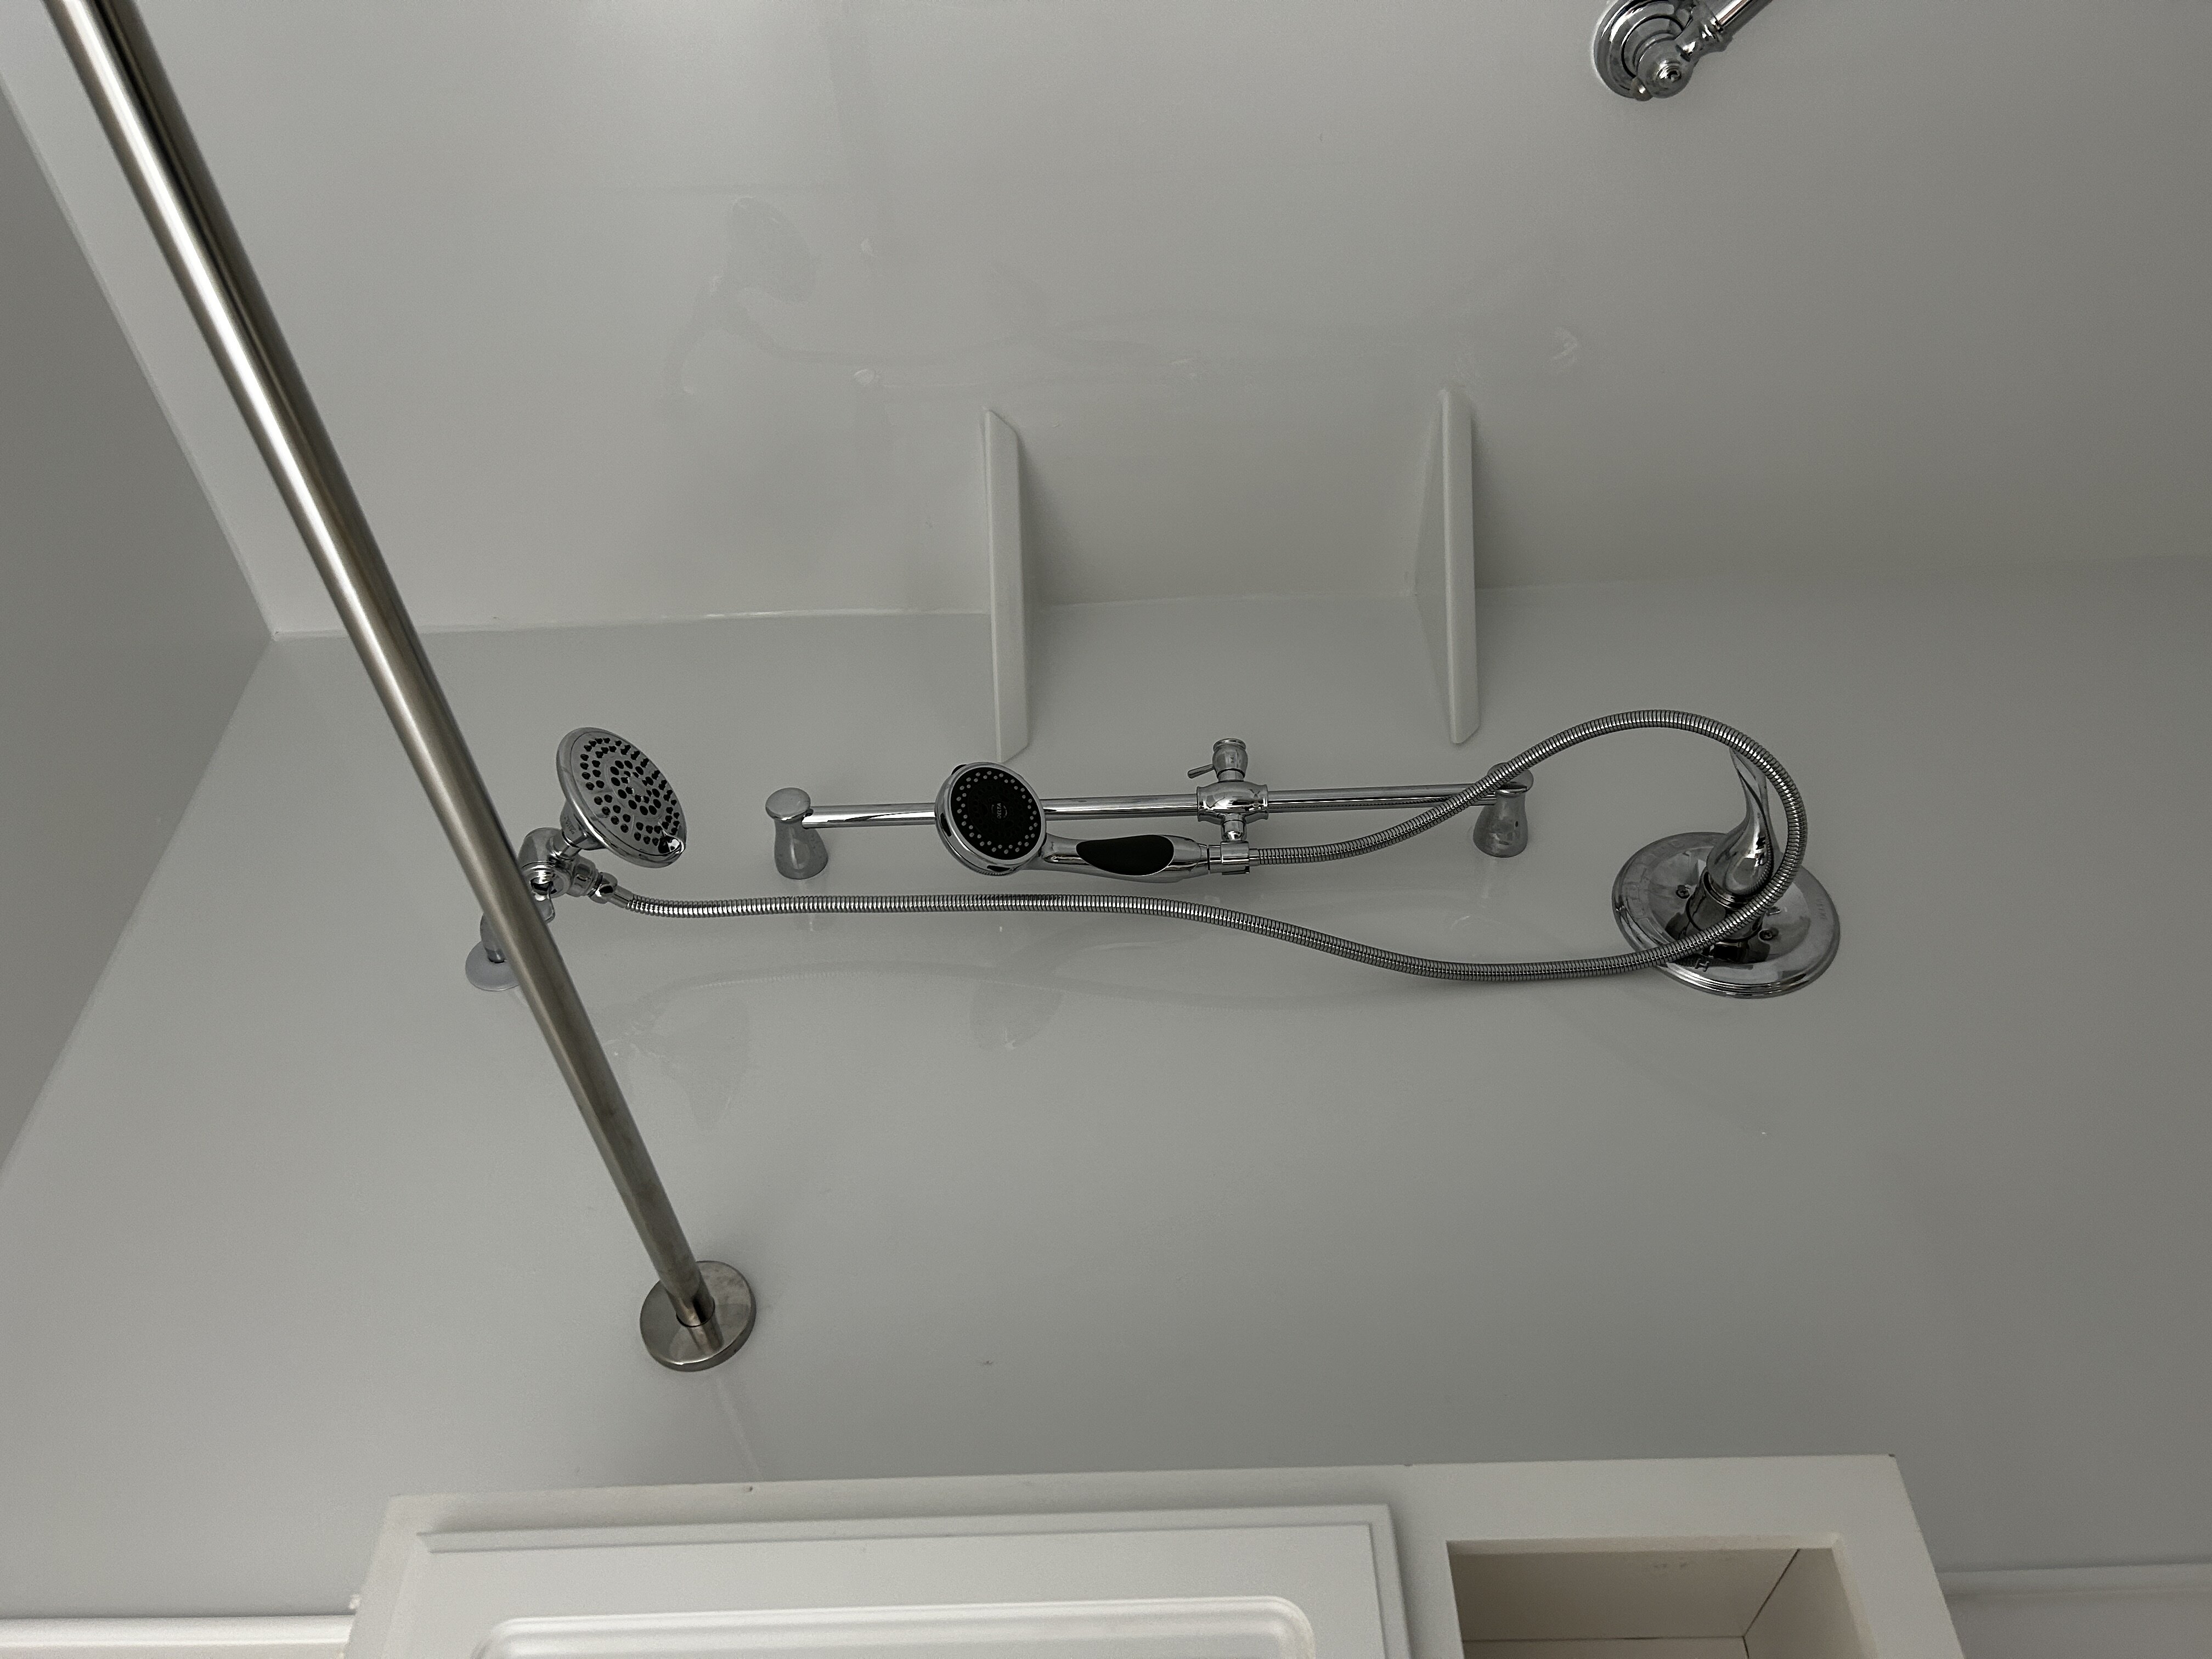 Shower head and shelving